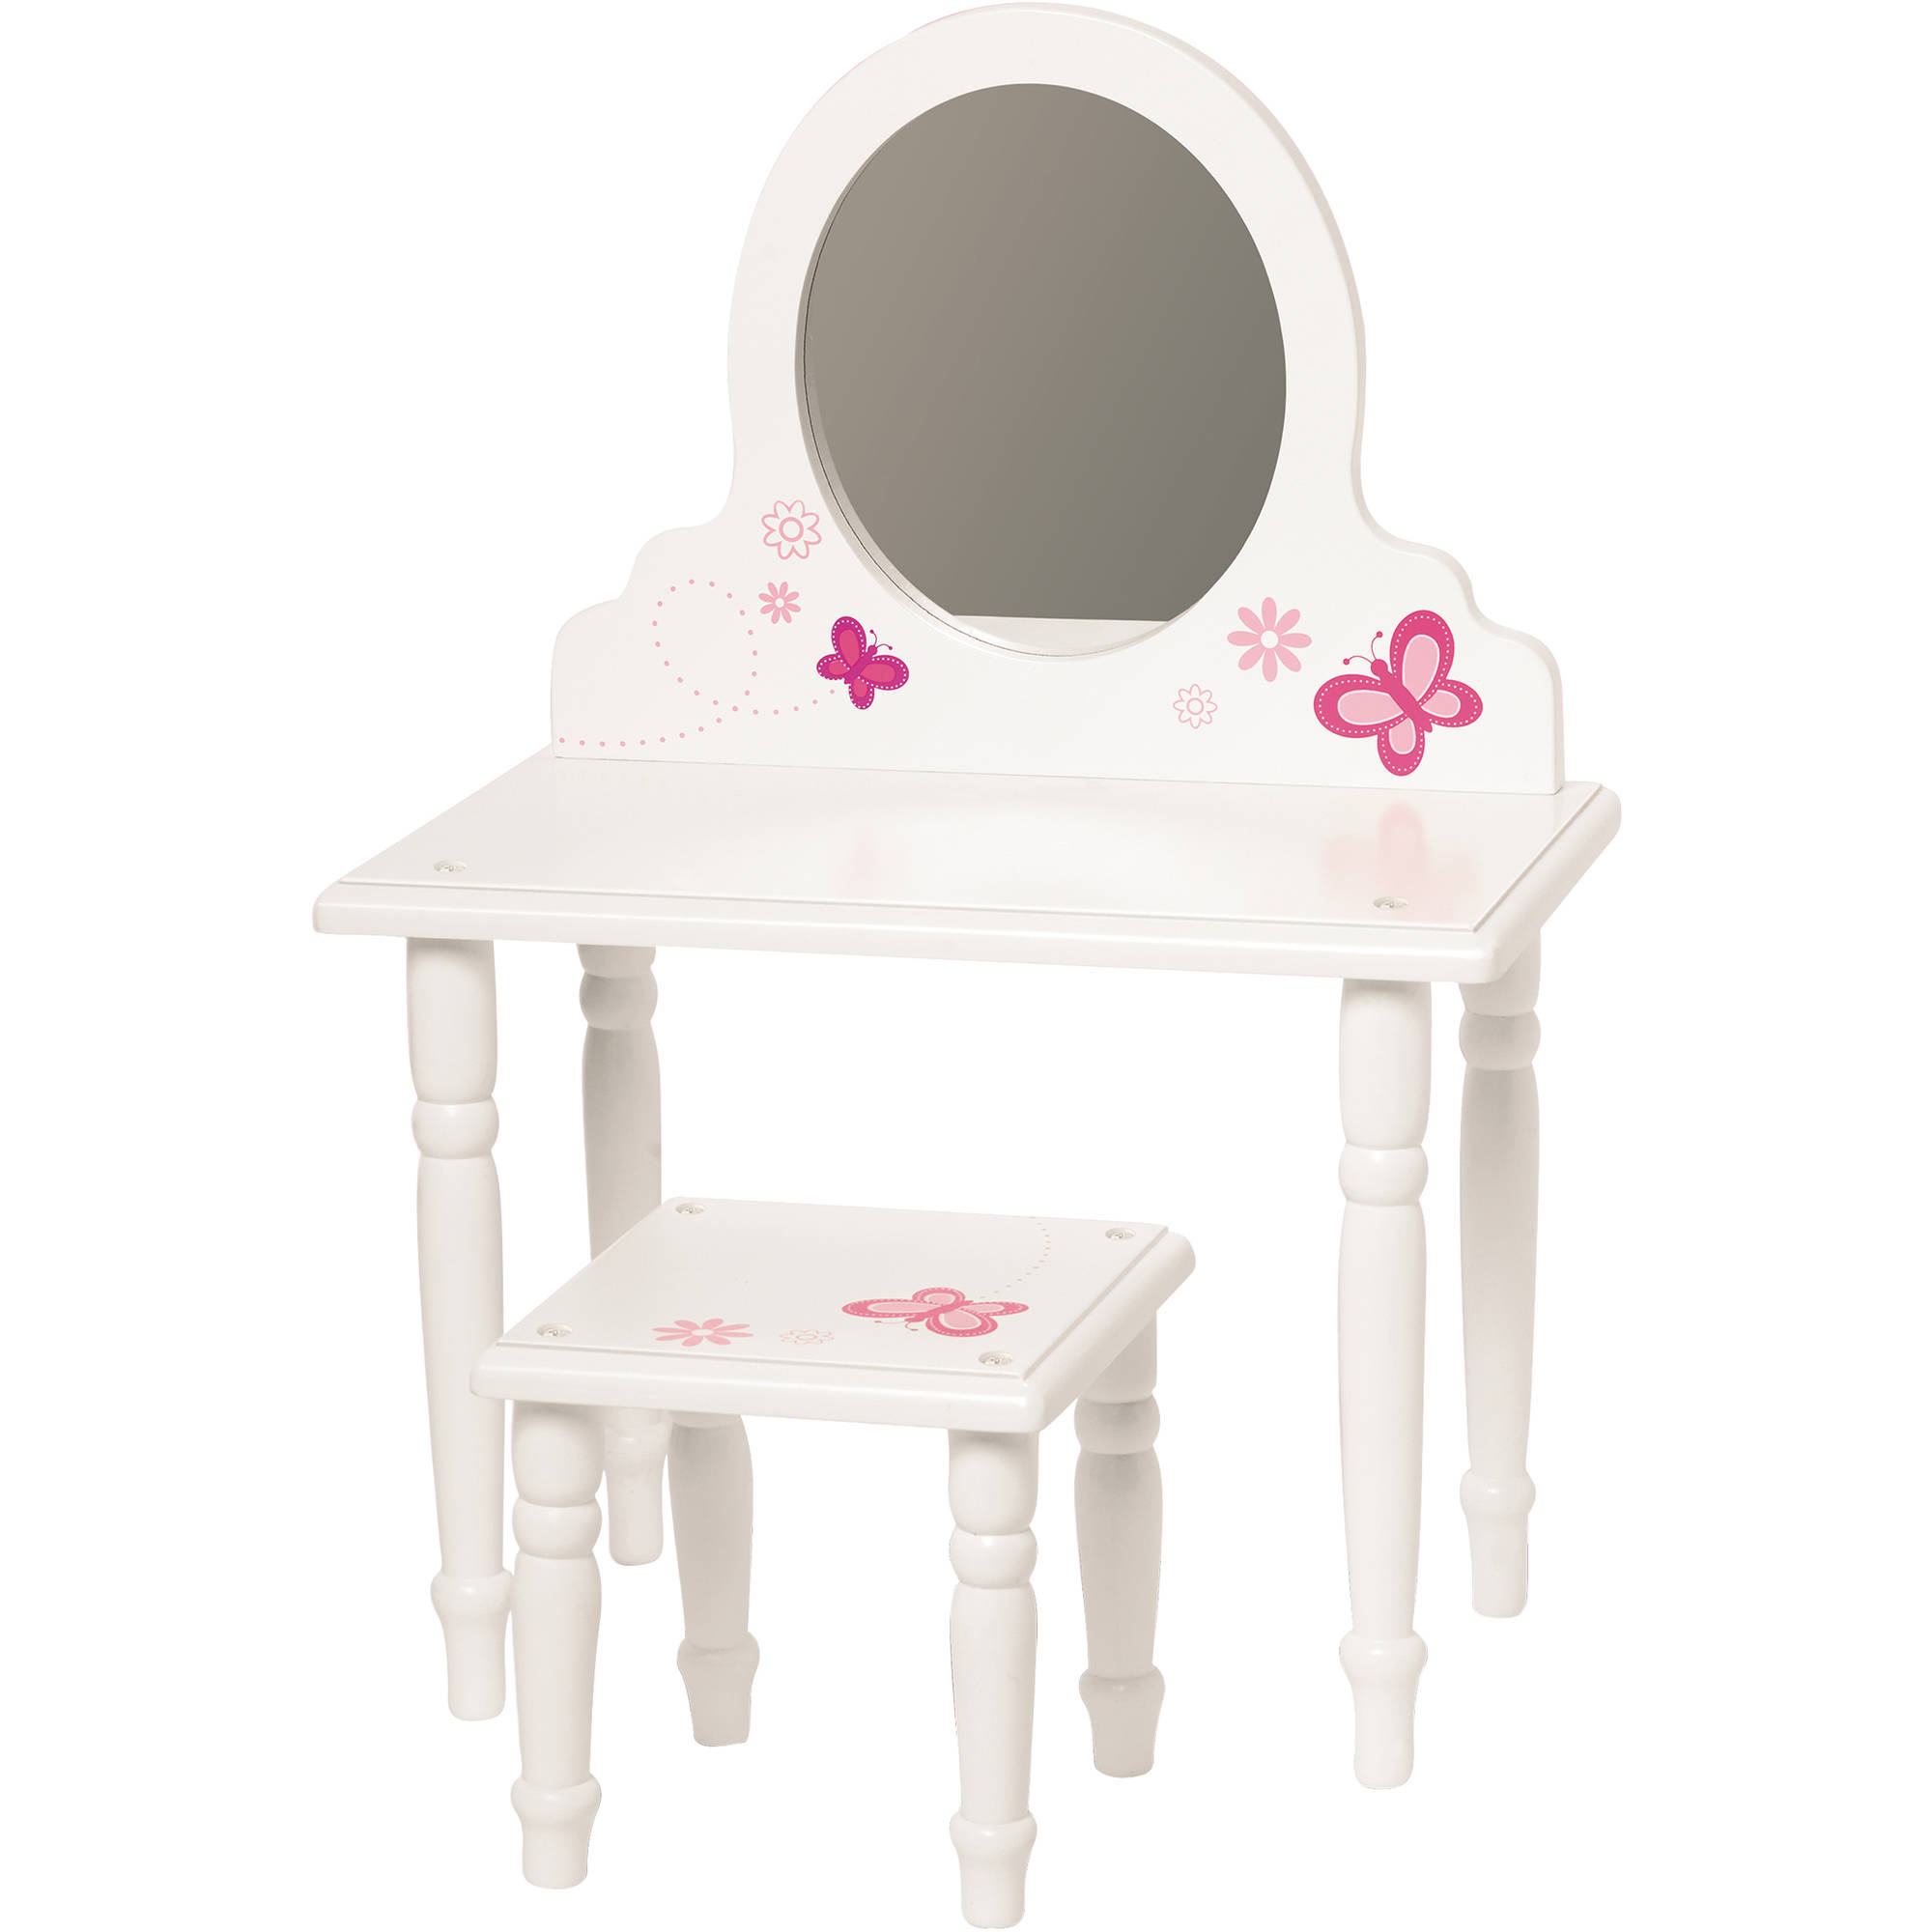 My Life As 18" Doll Furniture, Vanity and Stool - image 3 of 3